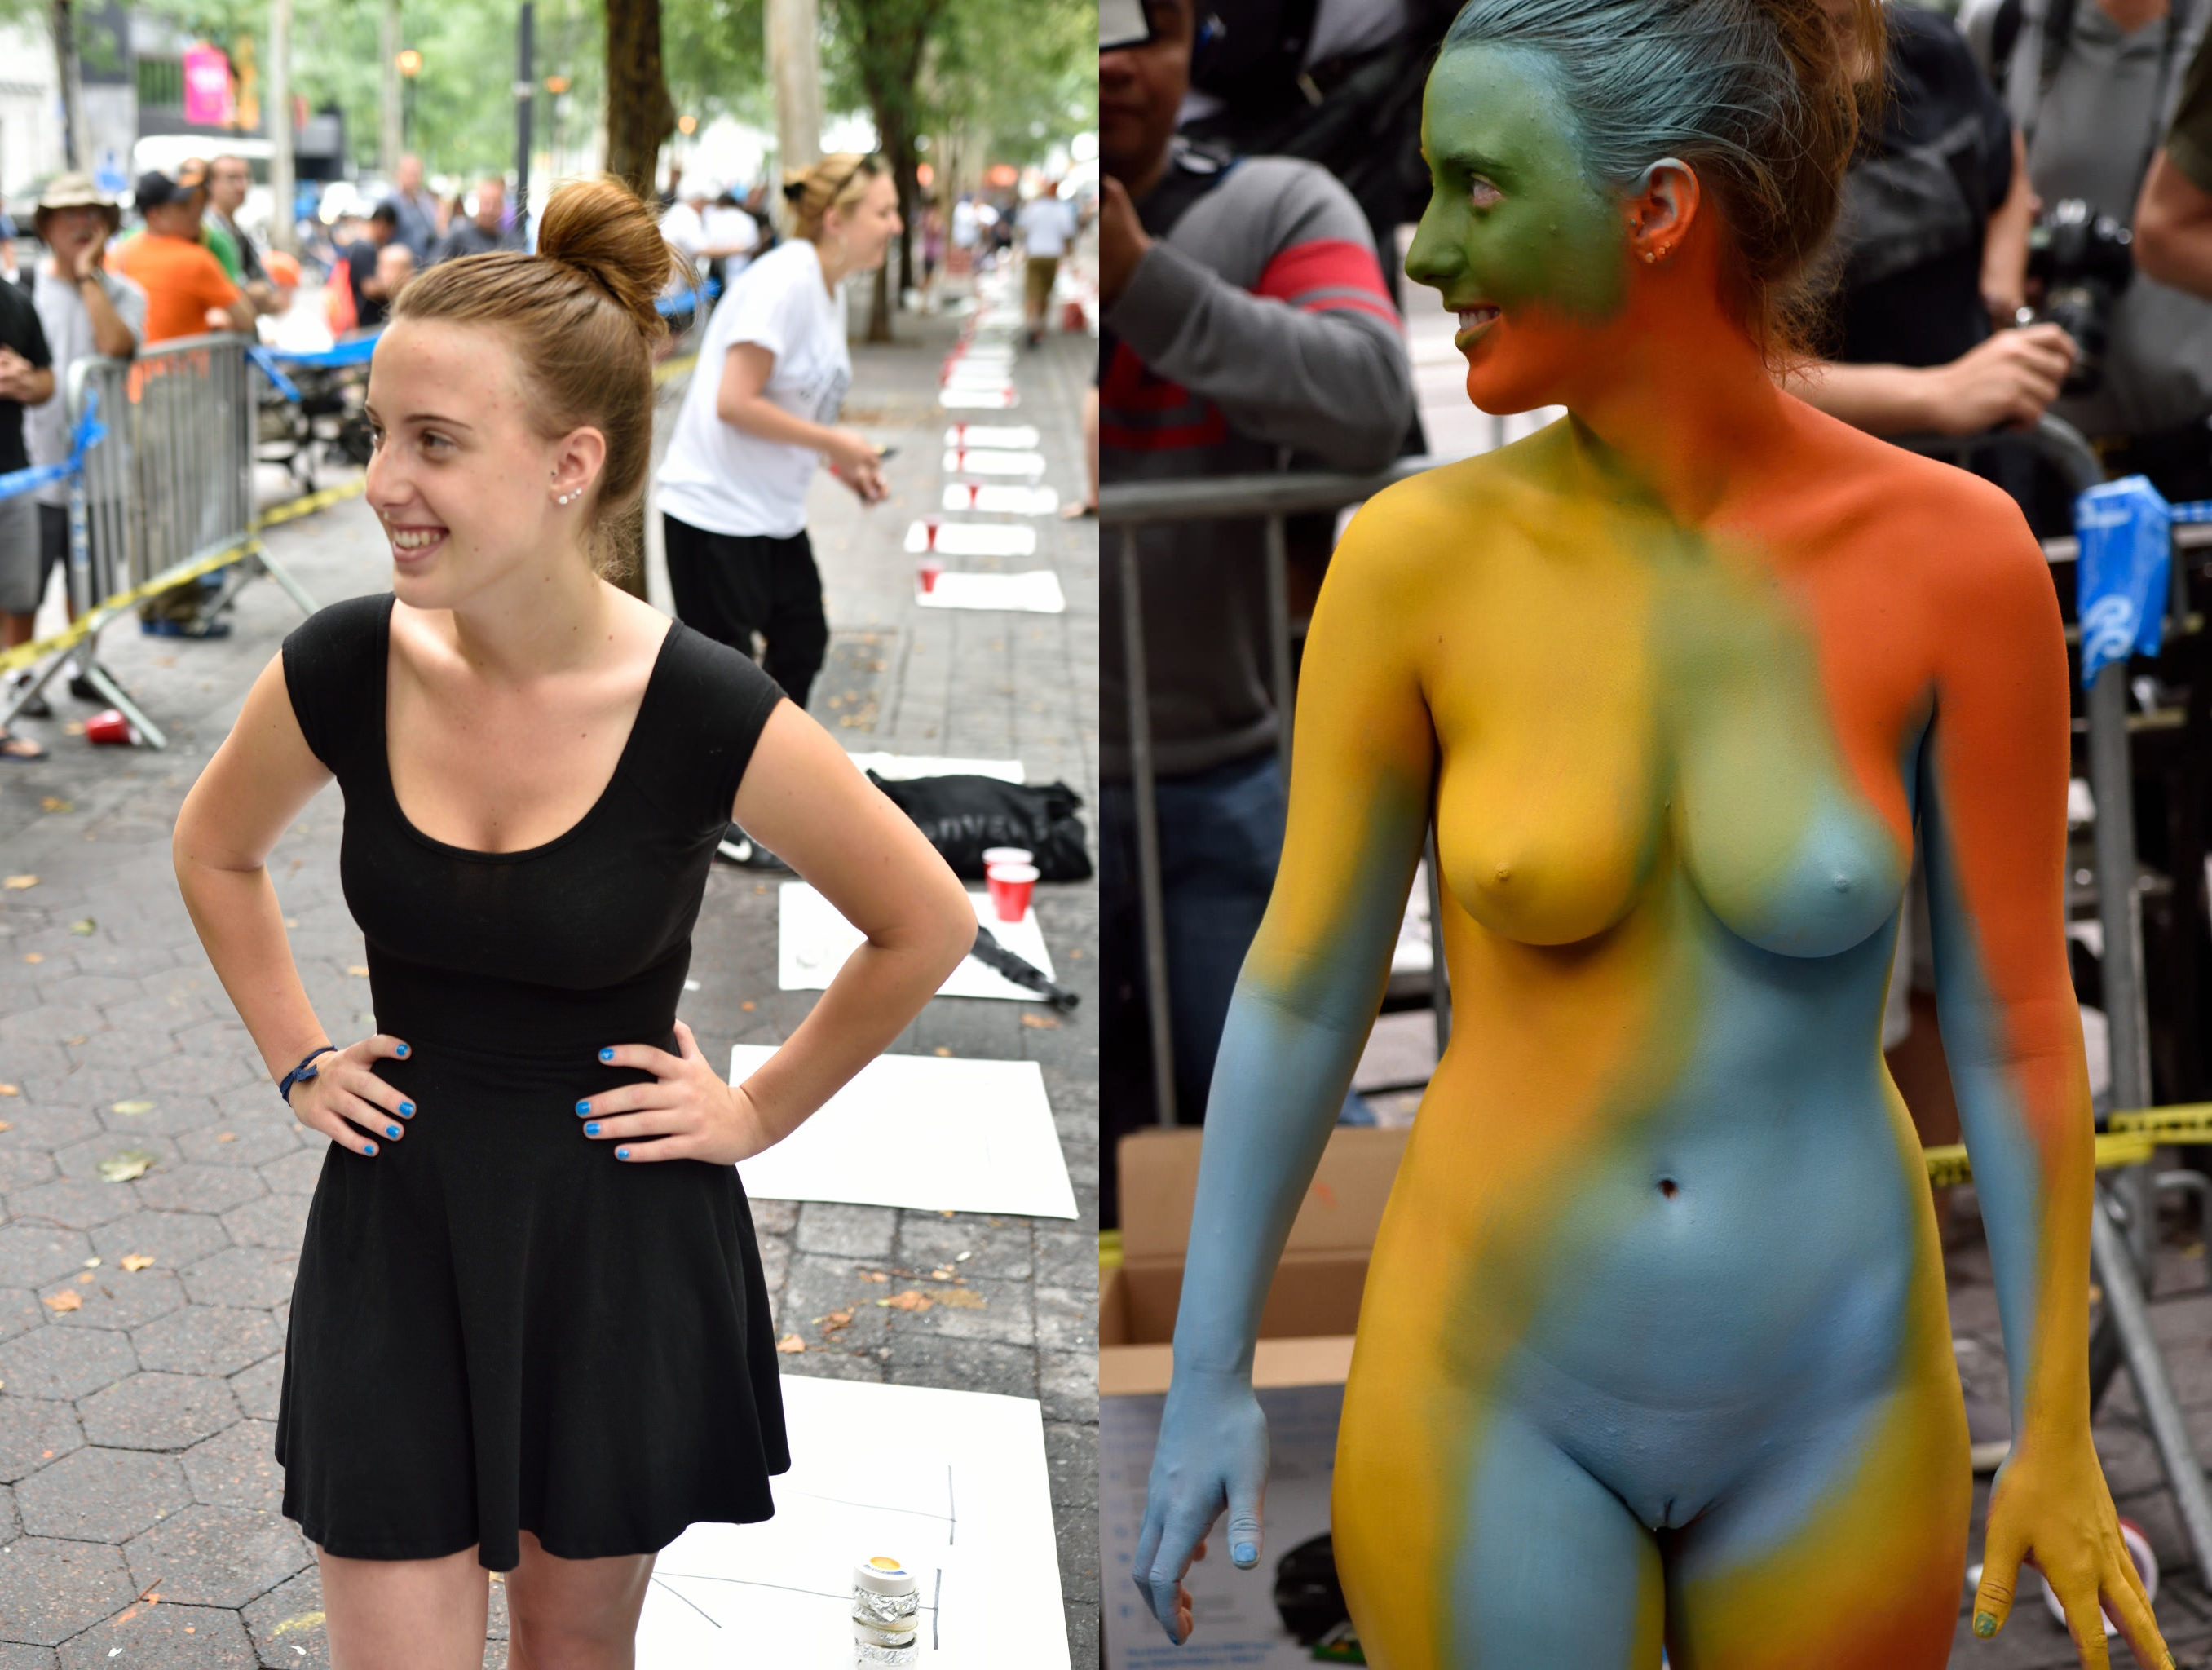 On/off body paint edition. 